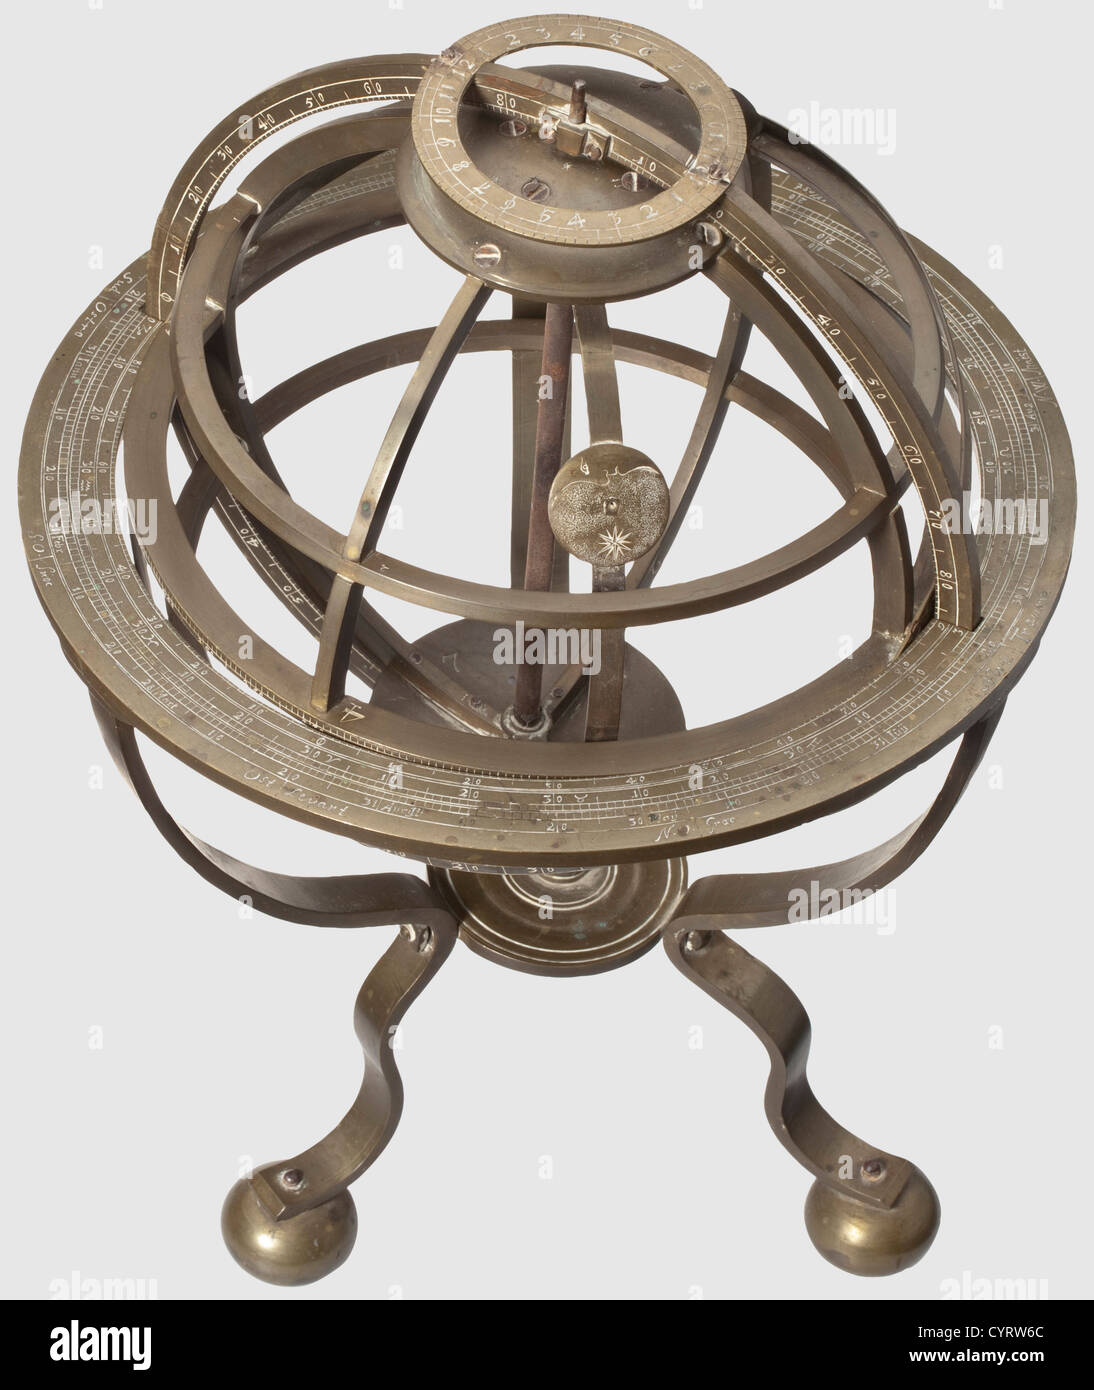 A Flemish armillary sphere with ecliptic ring,18th century All-metal construction made from brass with dark age patina.Sphere with continuous horizontal bands at the equator and the tropics as well as markings for the polar circle.The equator band with finely engraved 360 degrees scaling.Ecliptic ring with scaling and astrological signs.Movable clasp with symbol for the moon on the inside.Tripod on ball feet,the fixation ring with elaborate,multiple scaling and the cardinal directions.Numbered parts,screws with dot markings.Some small parts missing.,Additional-Rights-Clearences-Not Available Stock Photo